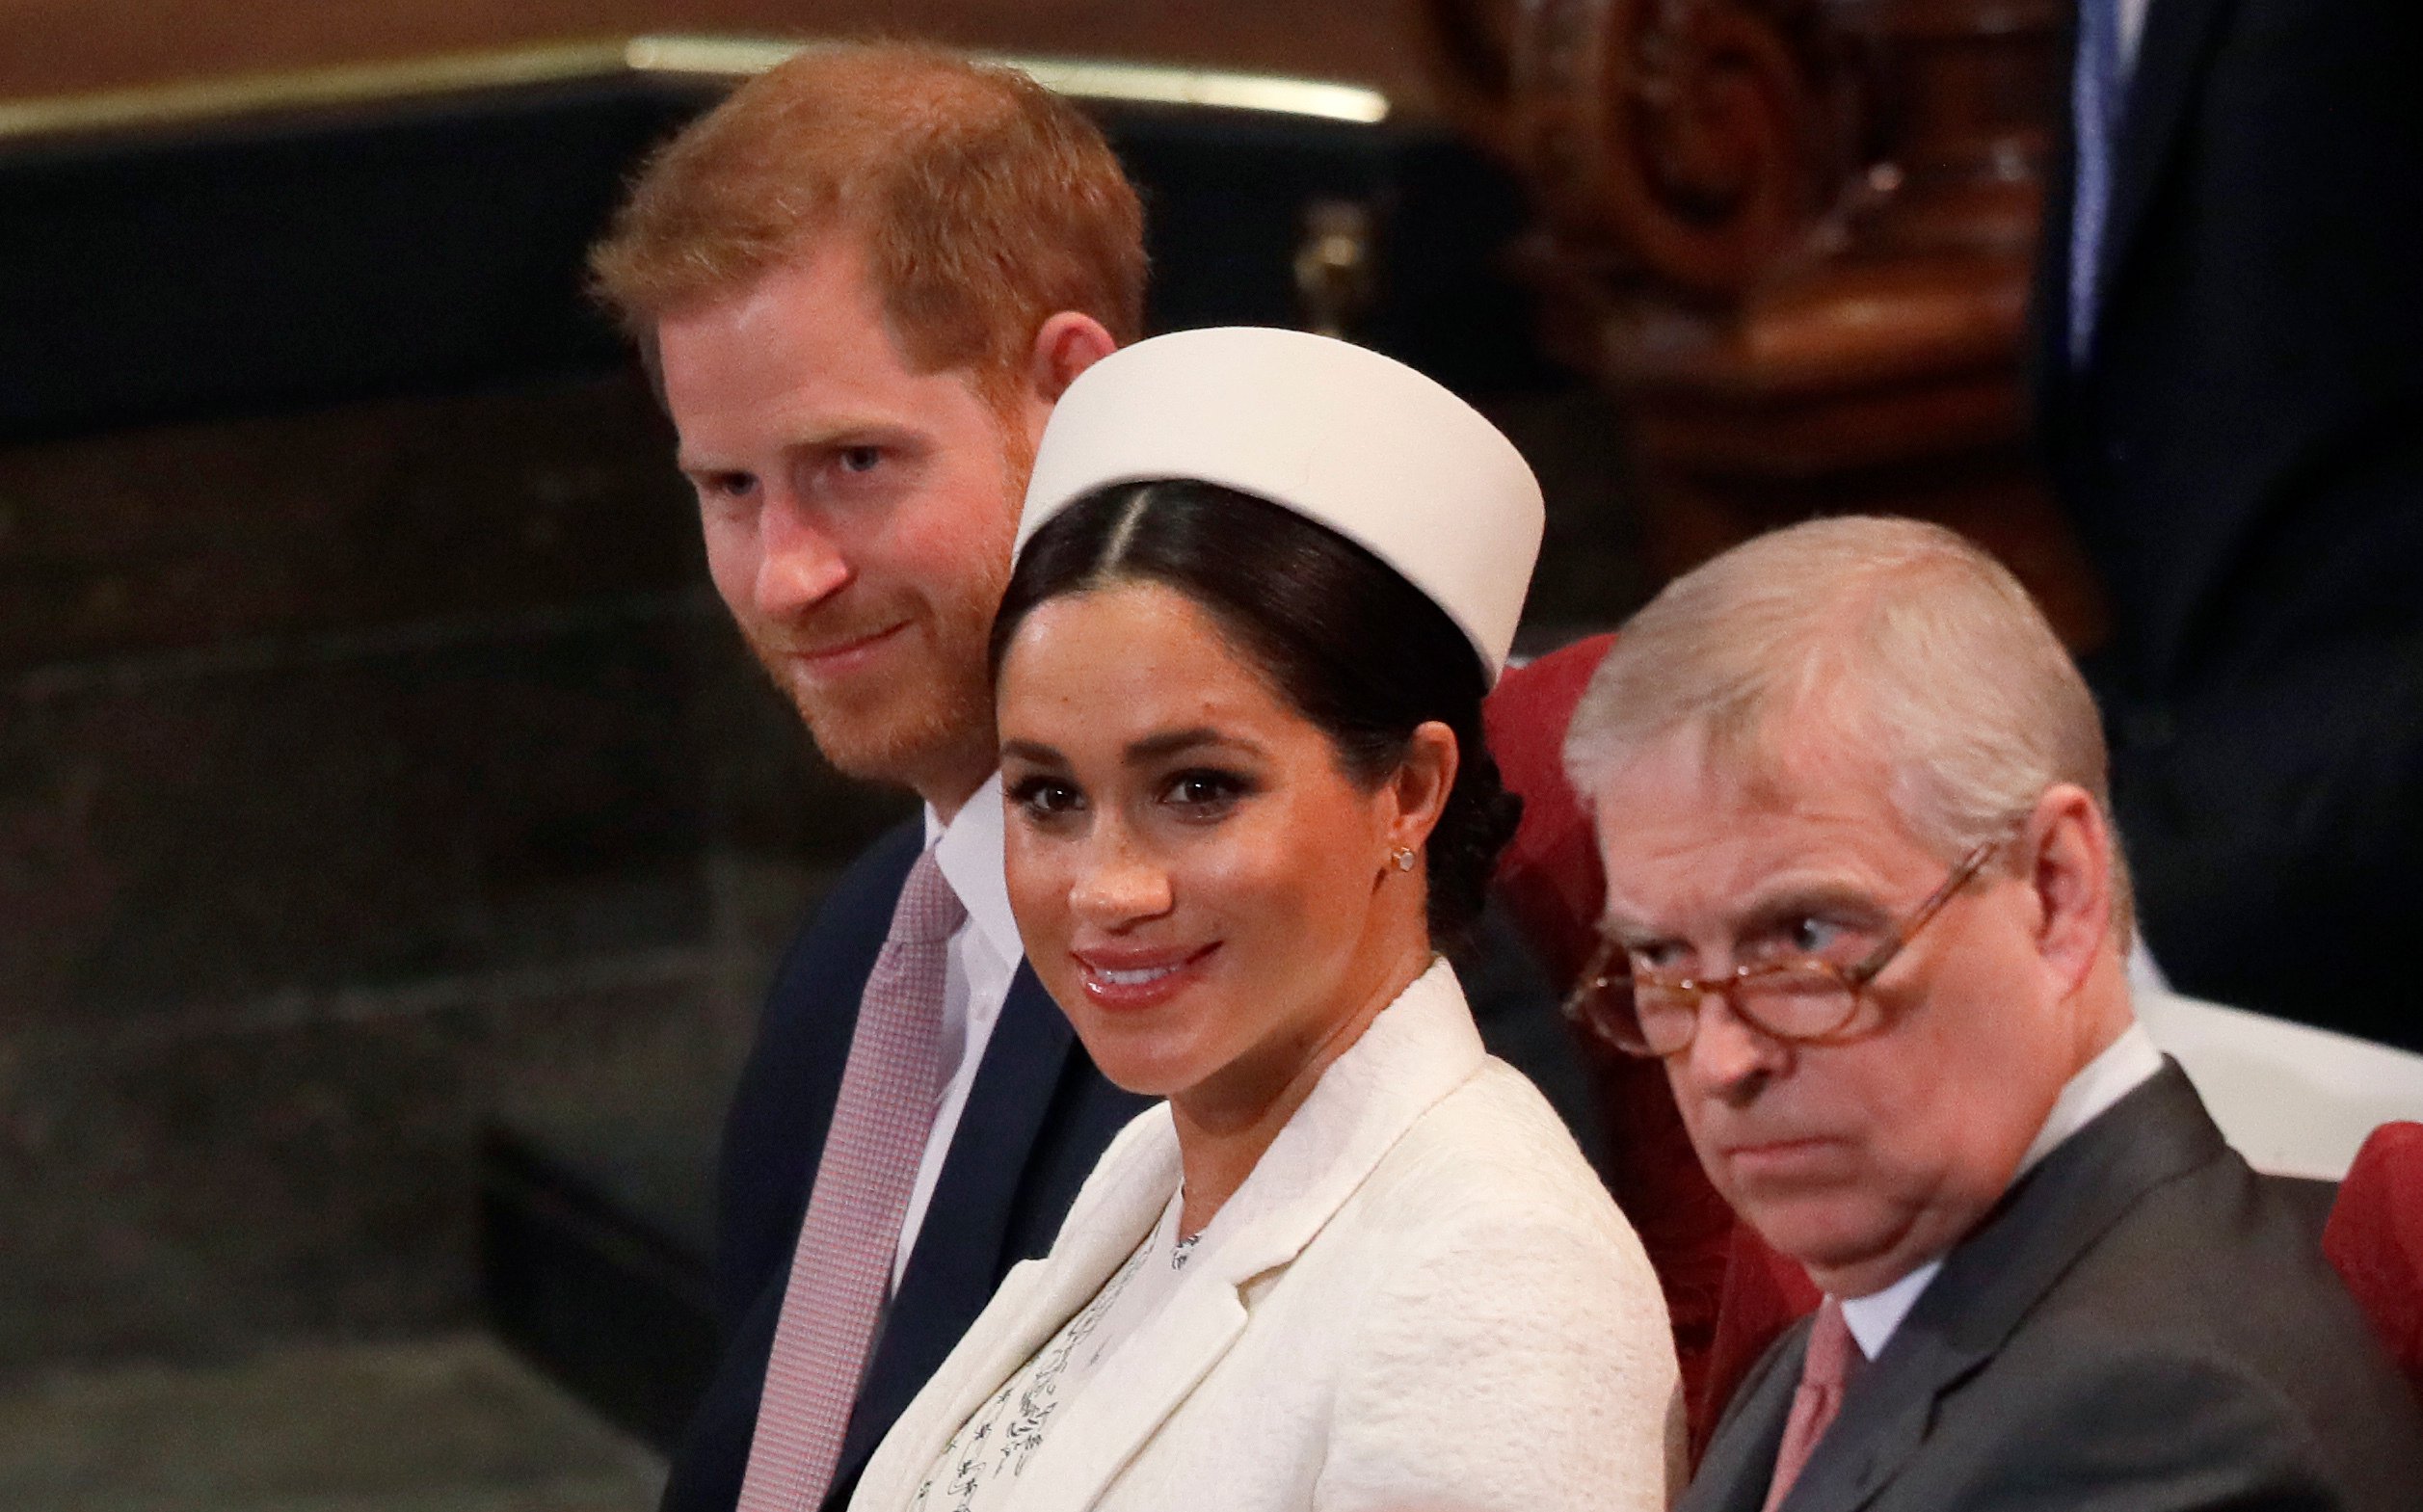 Meghan Markle, Prince Harry, and Prince Andrew, sitting together during the Commonwealth Service at Westminster Abbey in 2019